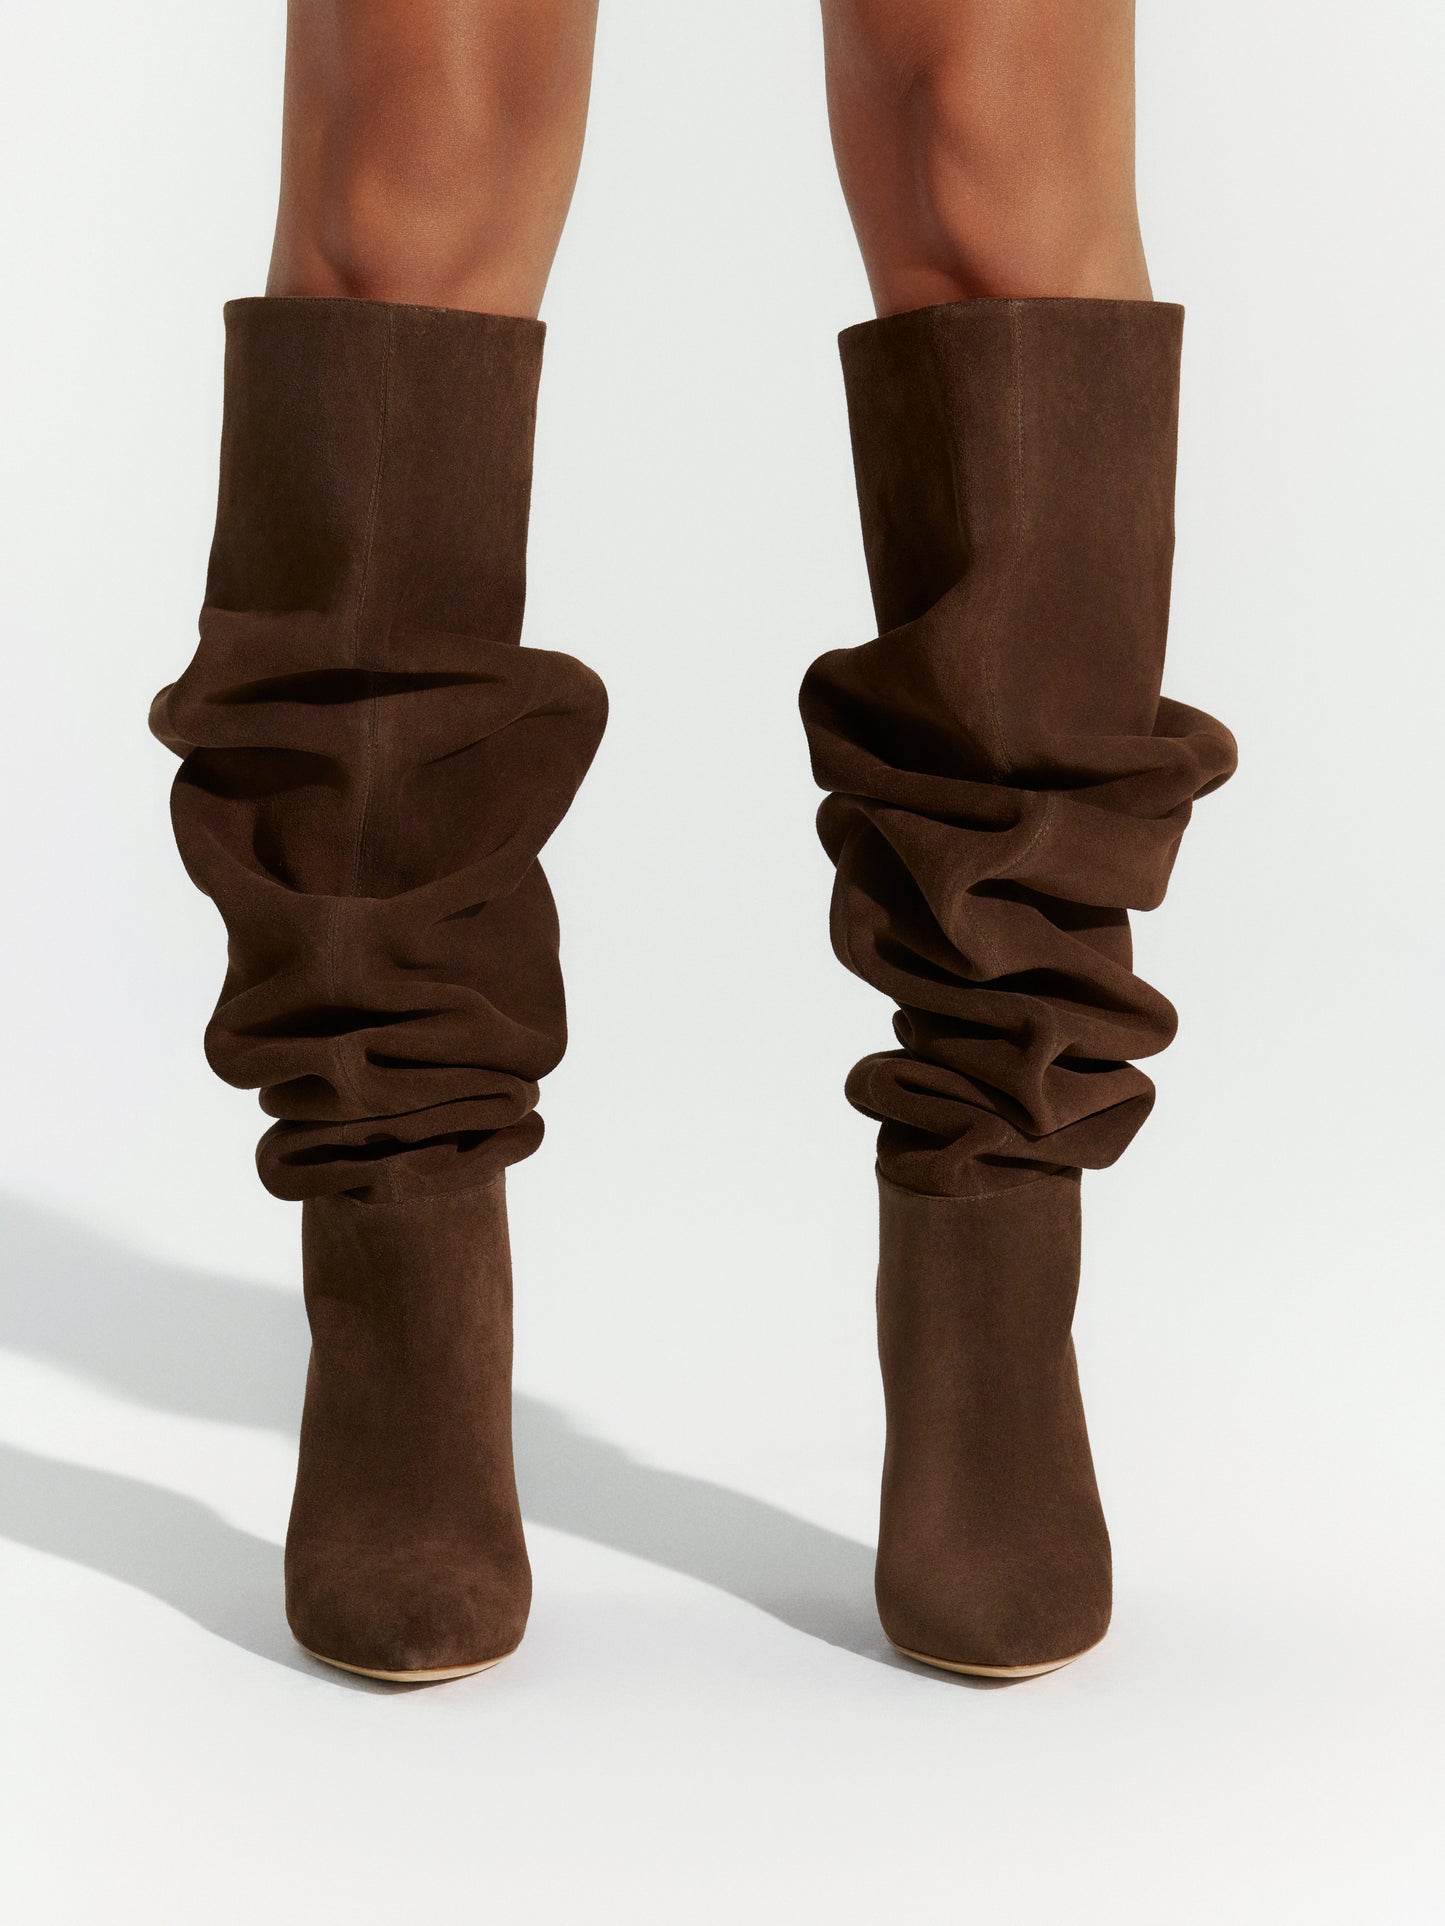 The Thigh High Boot